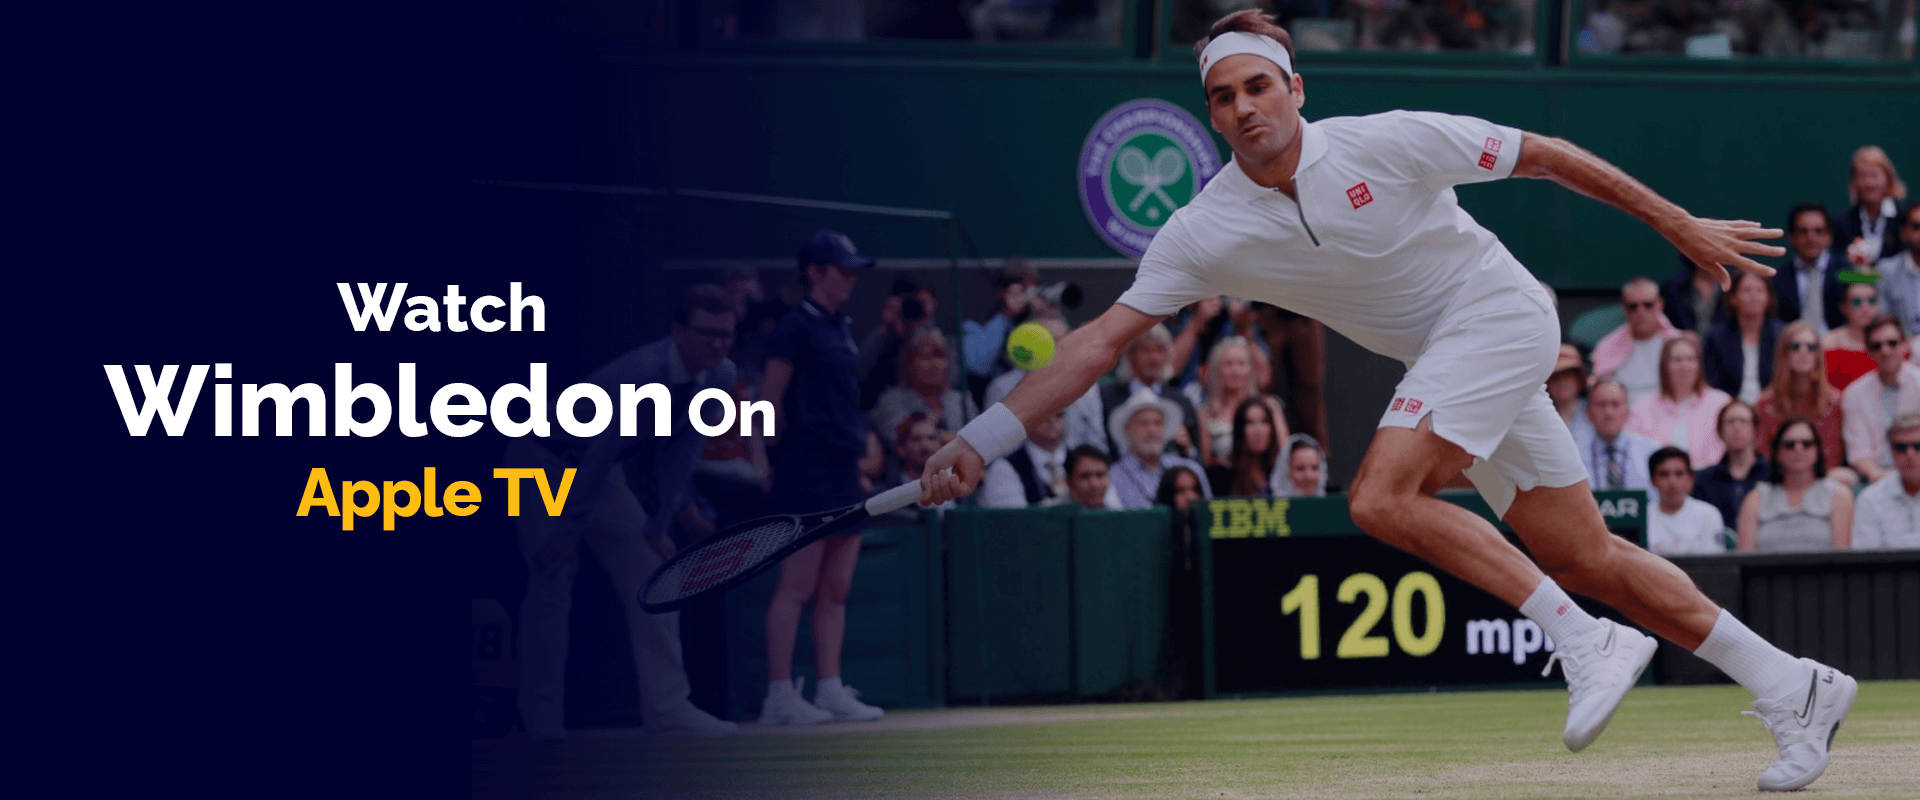 How to Watch Wimbledon on Apple TV